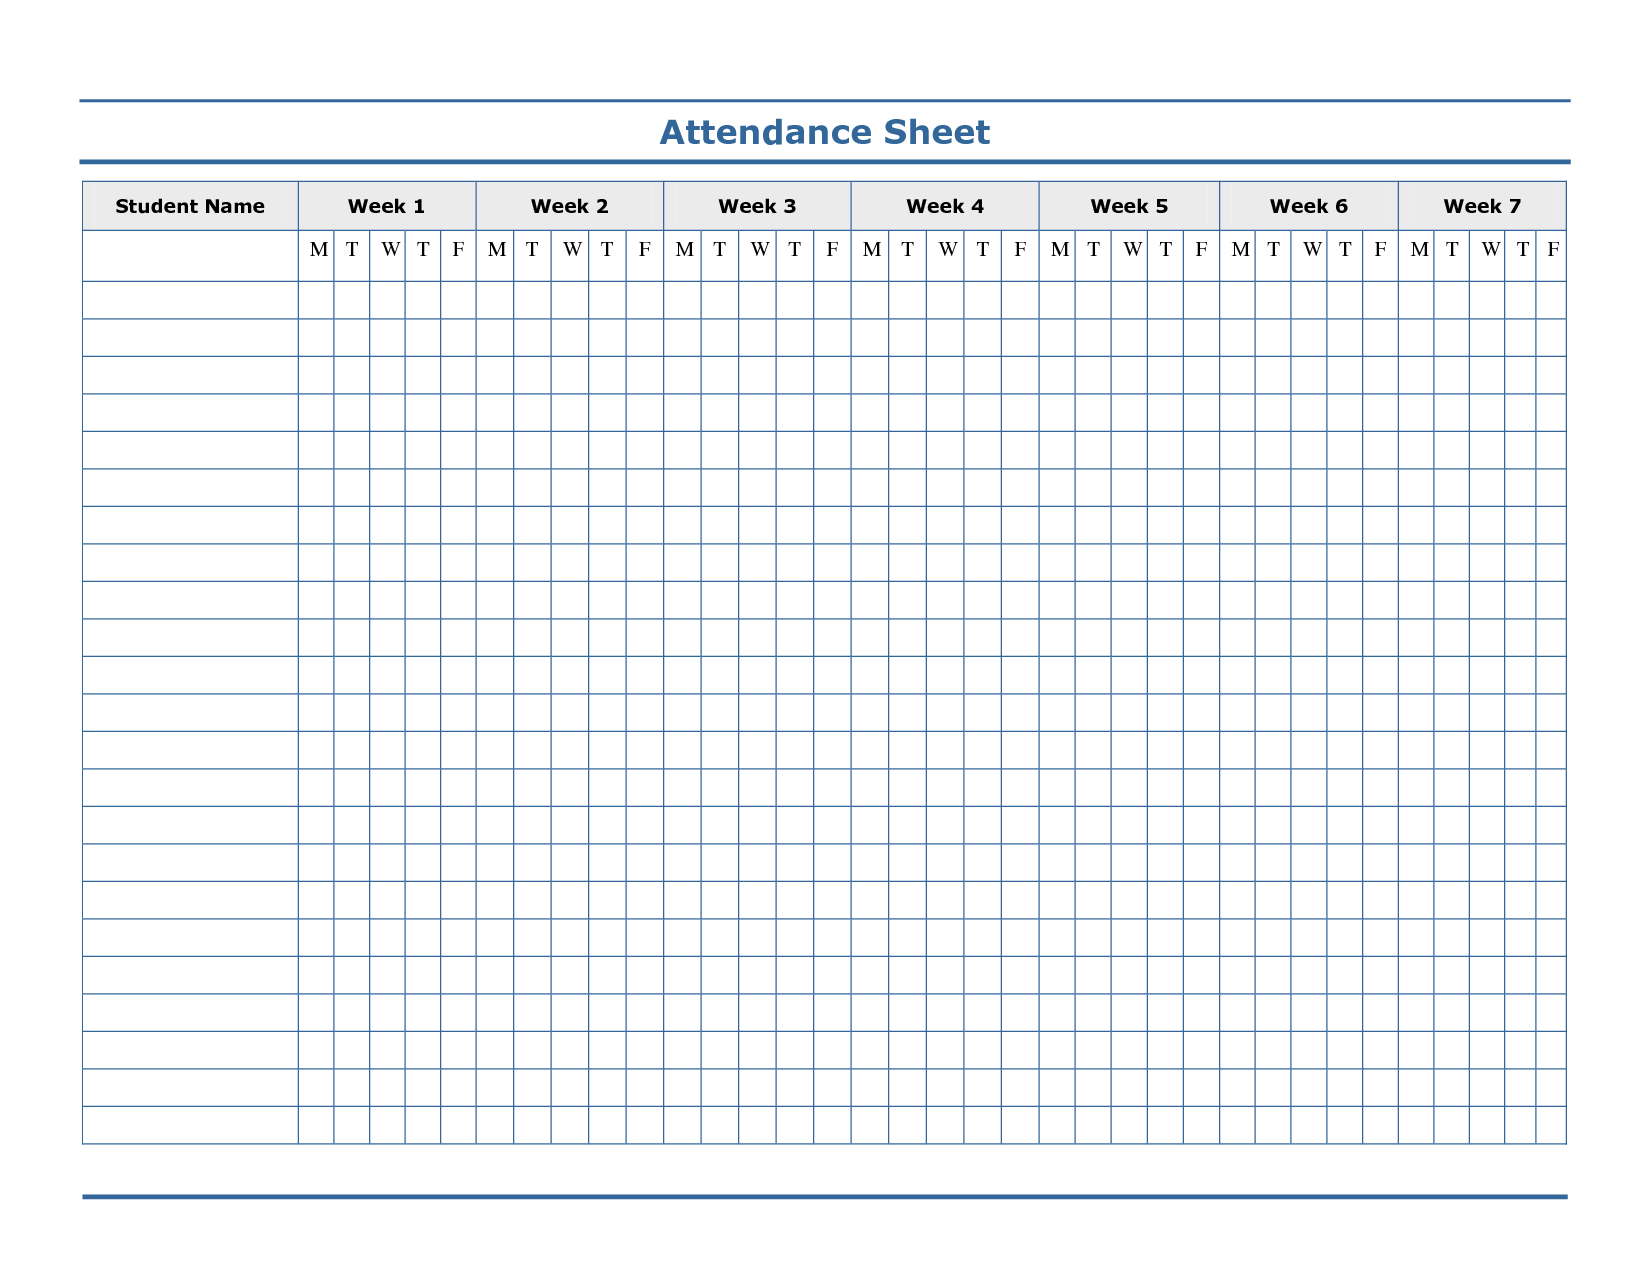 Free Printable Blank Attendance Sheets | Attendance Sheet - Free Printable Attendance Sheets For Homeschool